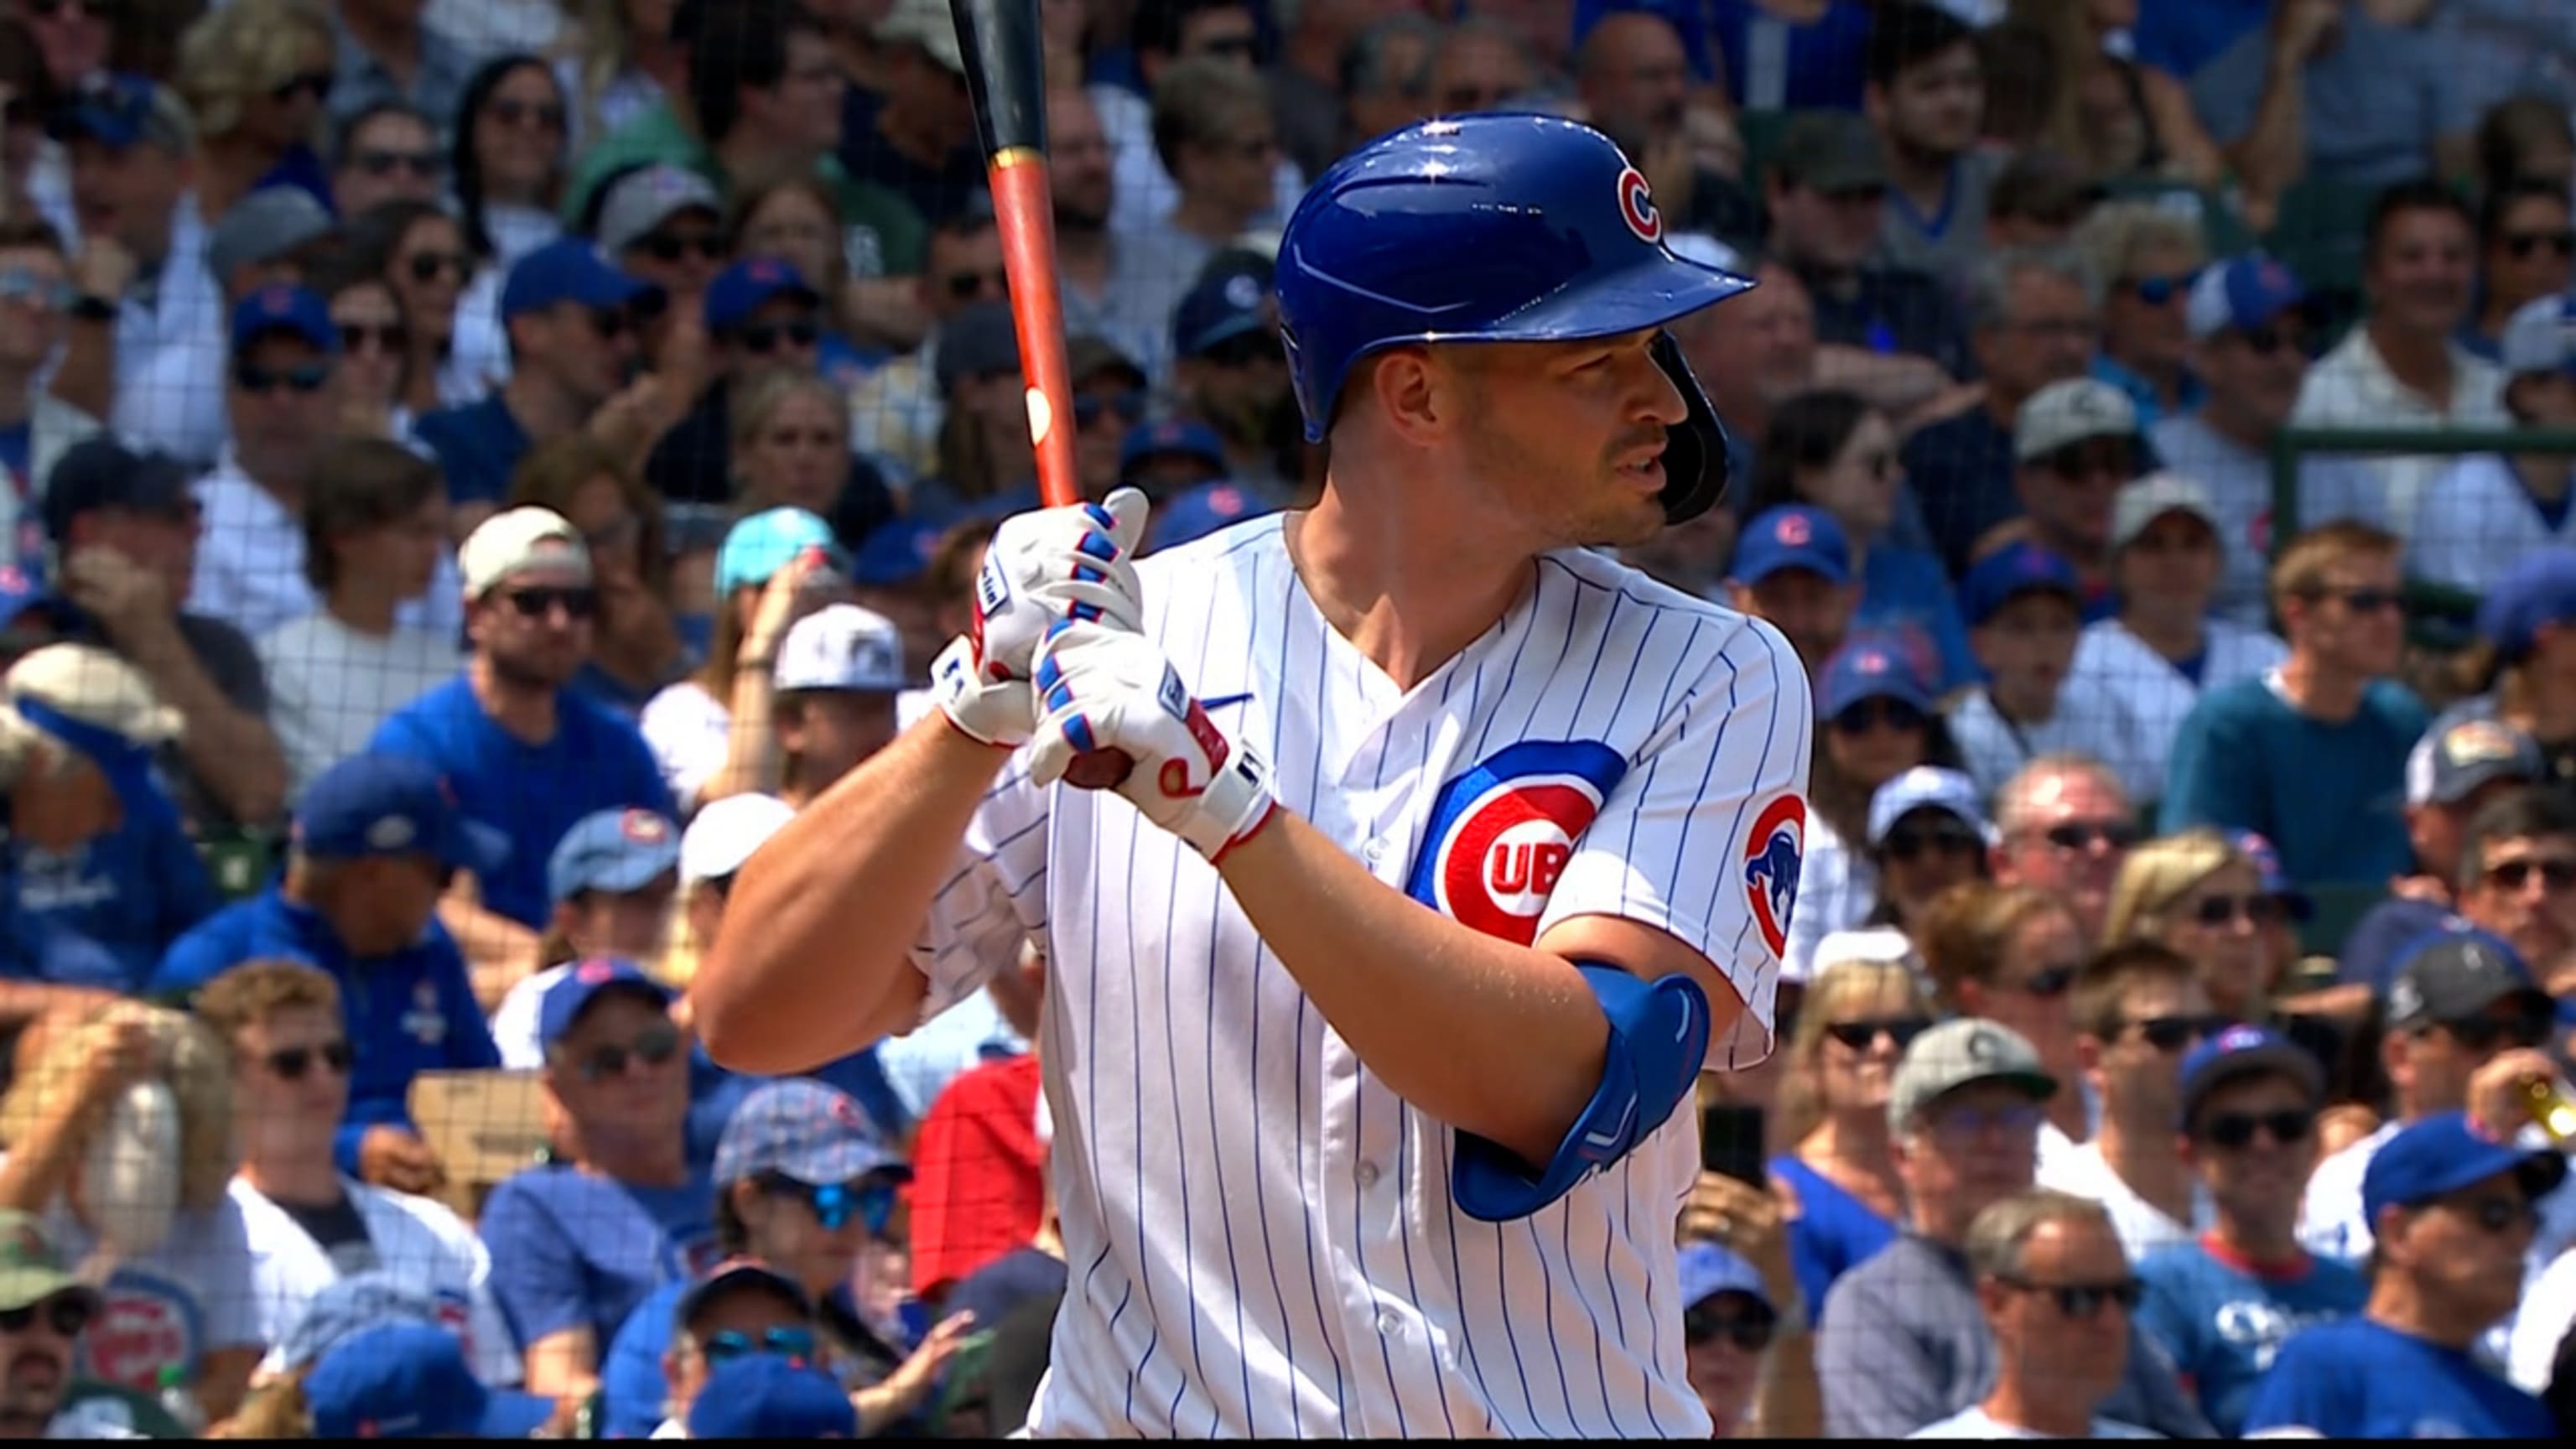 Bellinger drives in 4 runs as Cubs top the Cardinals 8-6